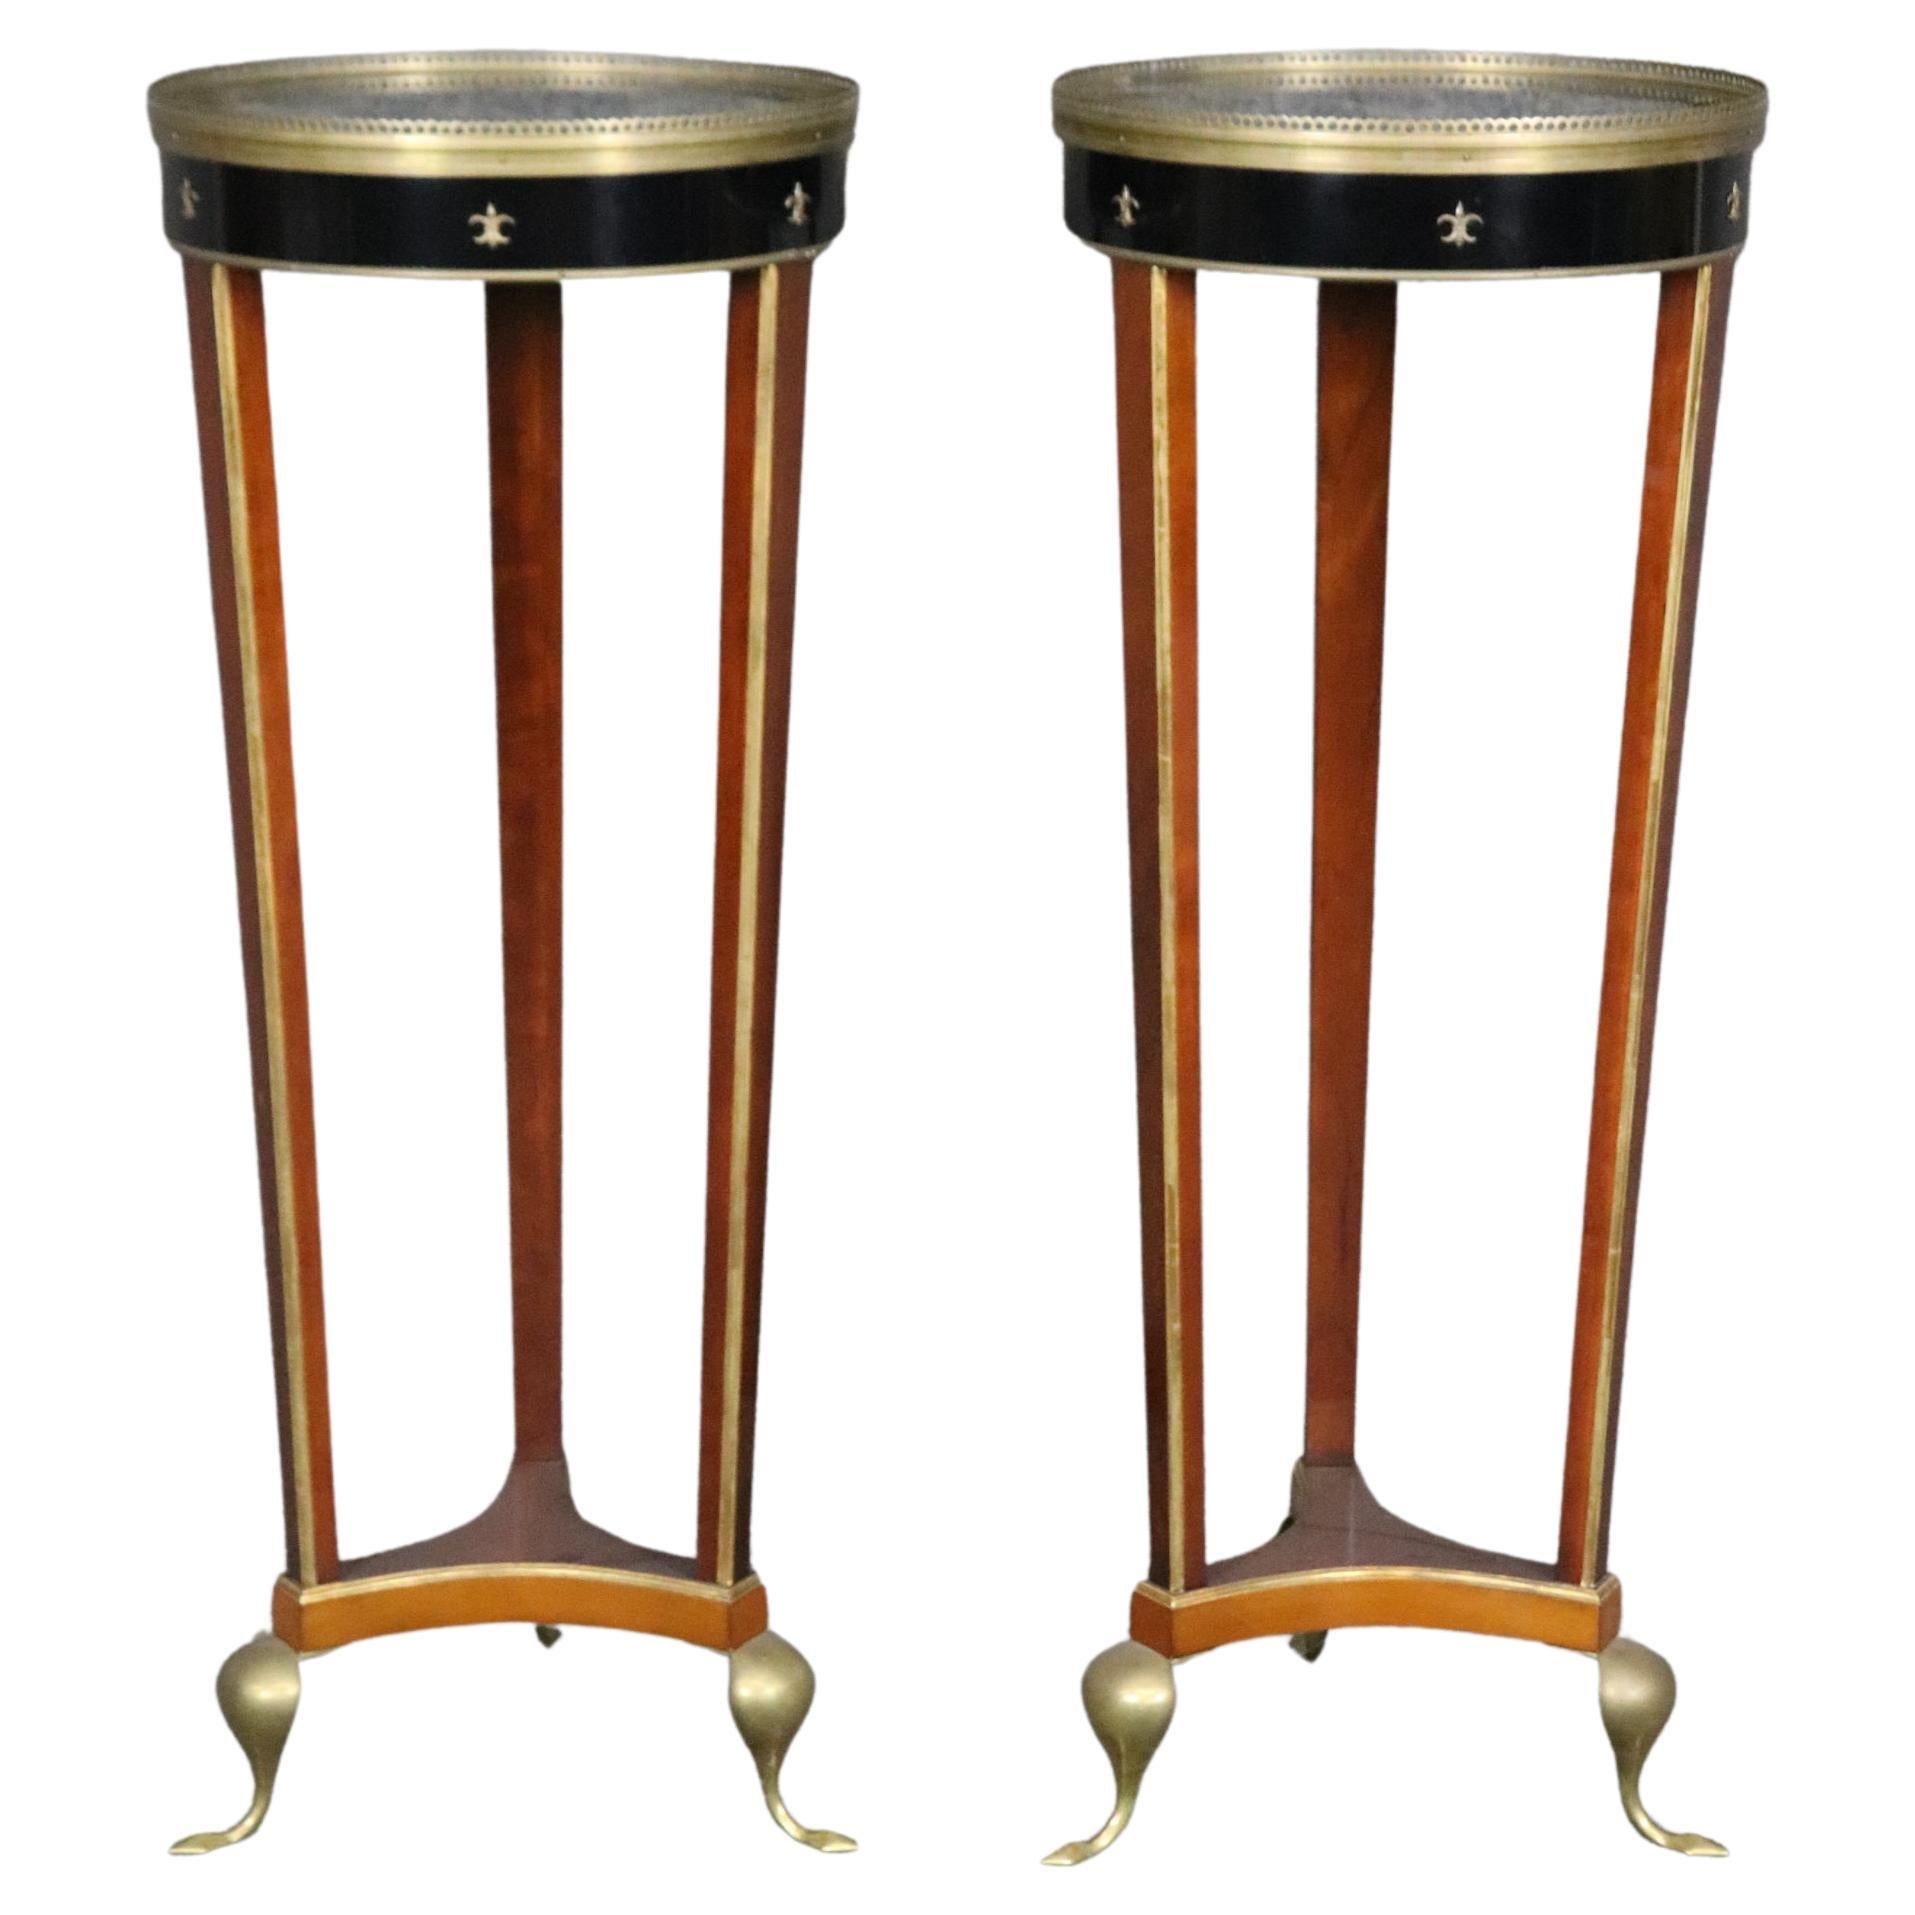 Fine Pair of John Widdicomb Brass and Faux Marble Painted French Empire Stands For Sale